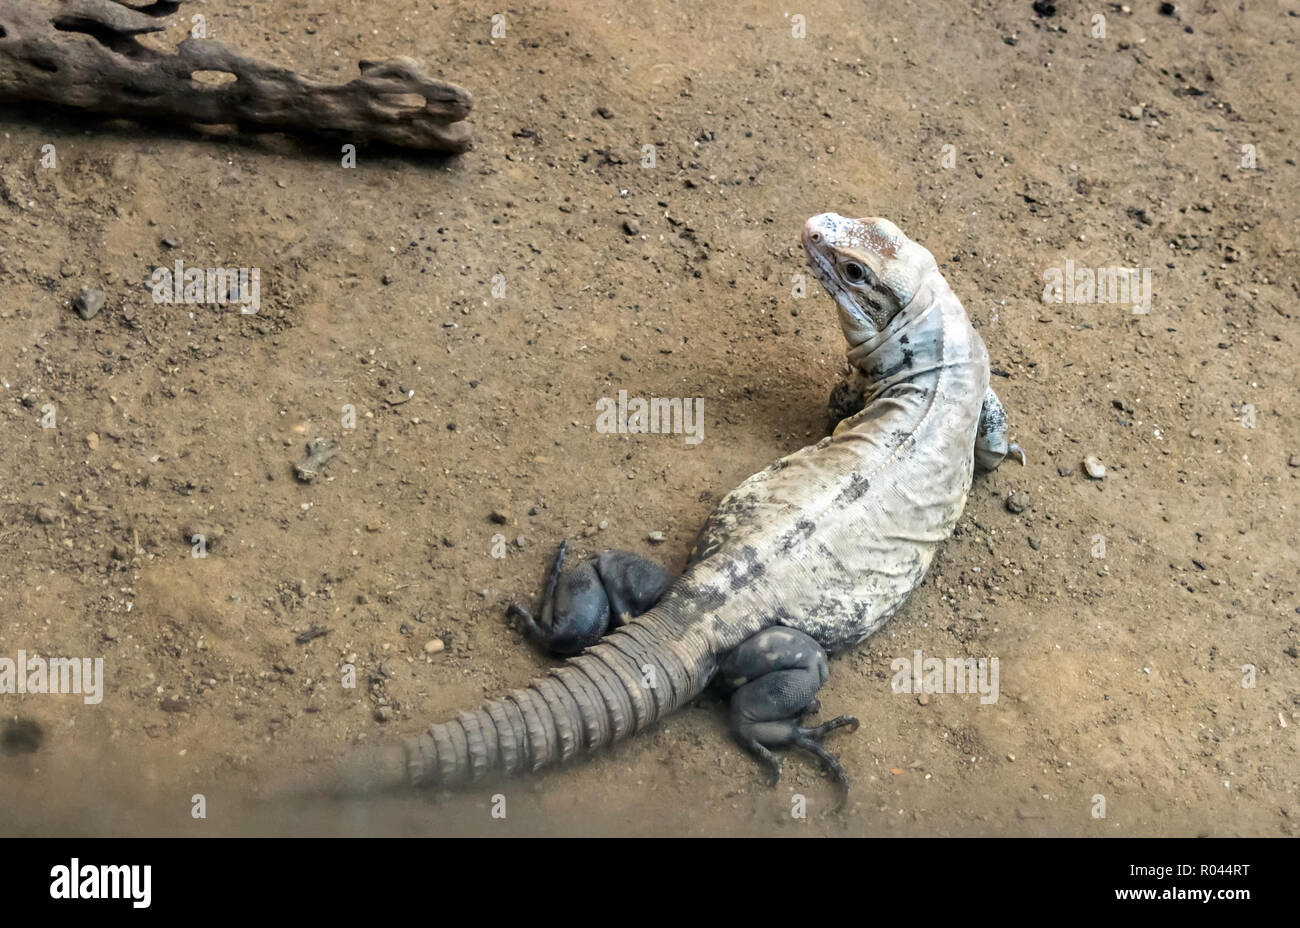 Utila iguana (Ctenosaura bakeri), also known as the Baker's spinytail iguana, swamper or wishiwilly del suampo, shot from above. It is critically enda Stock Photo